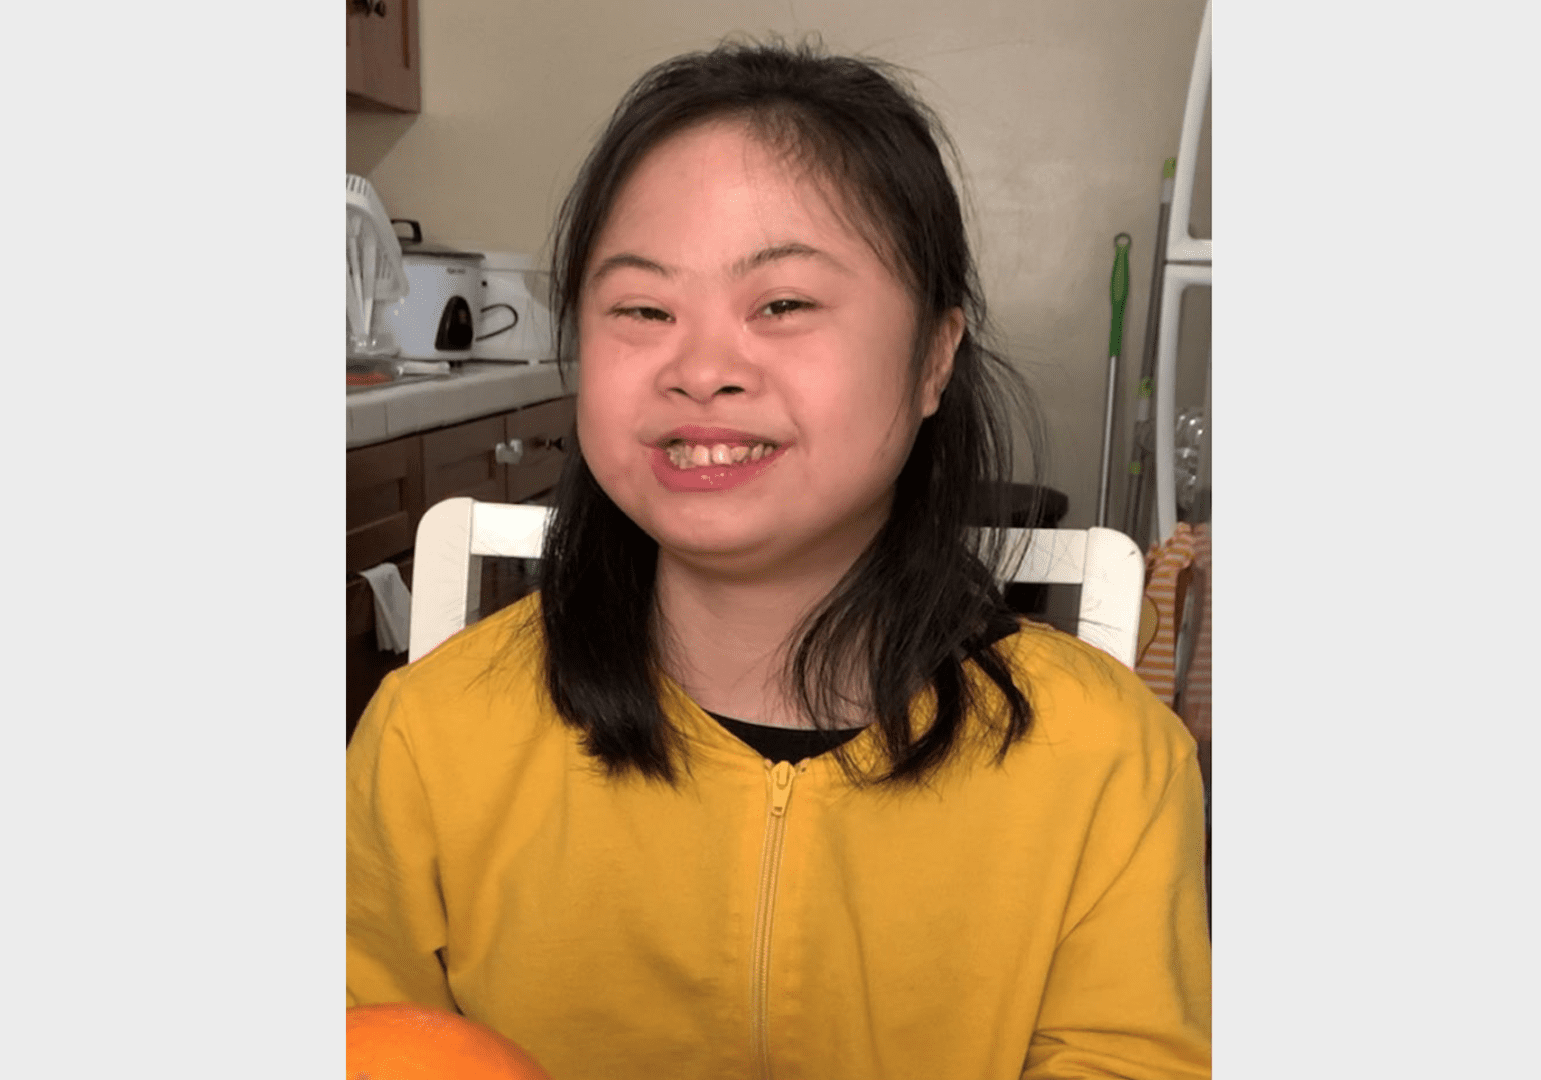 missing, Glendale, down syndrome